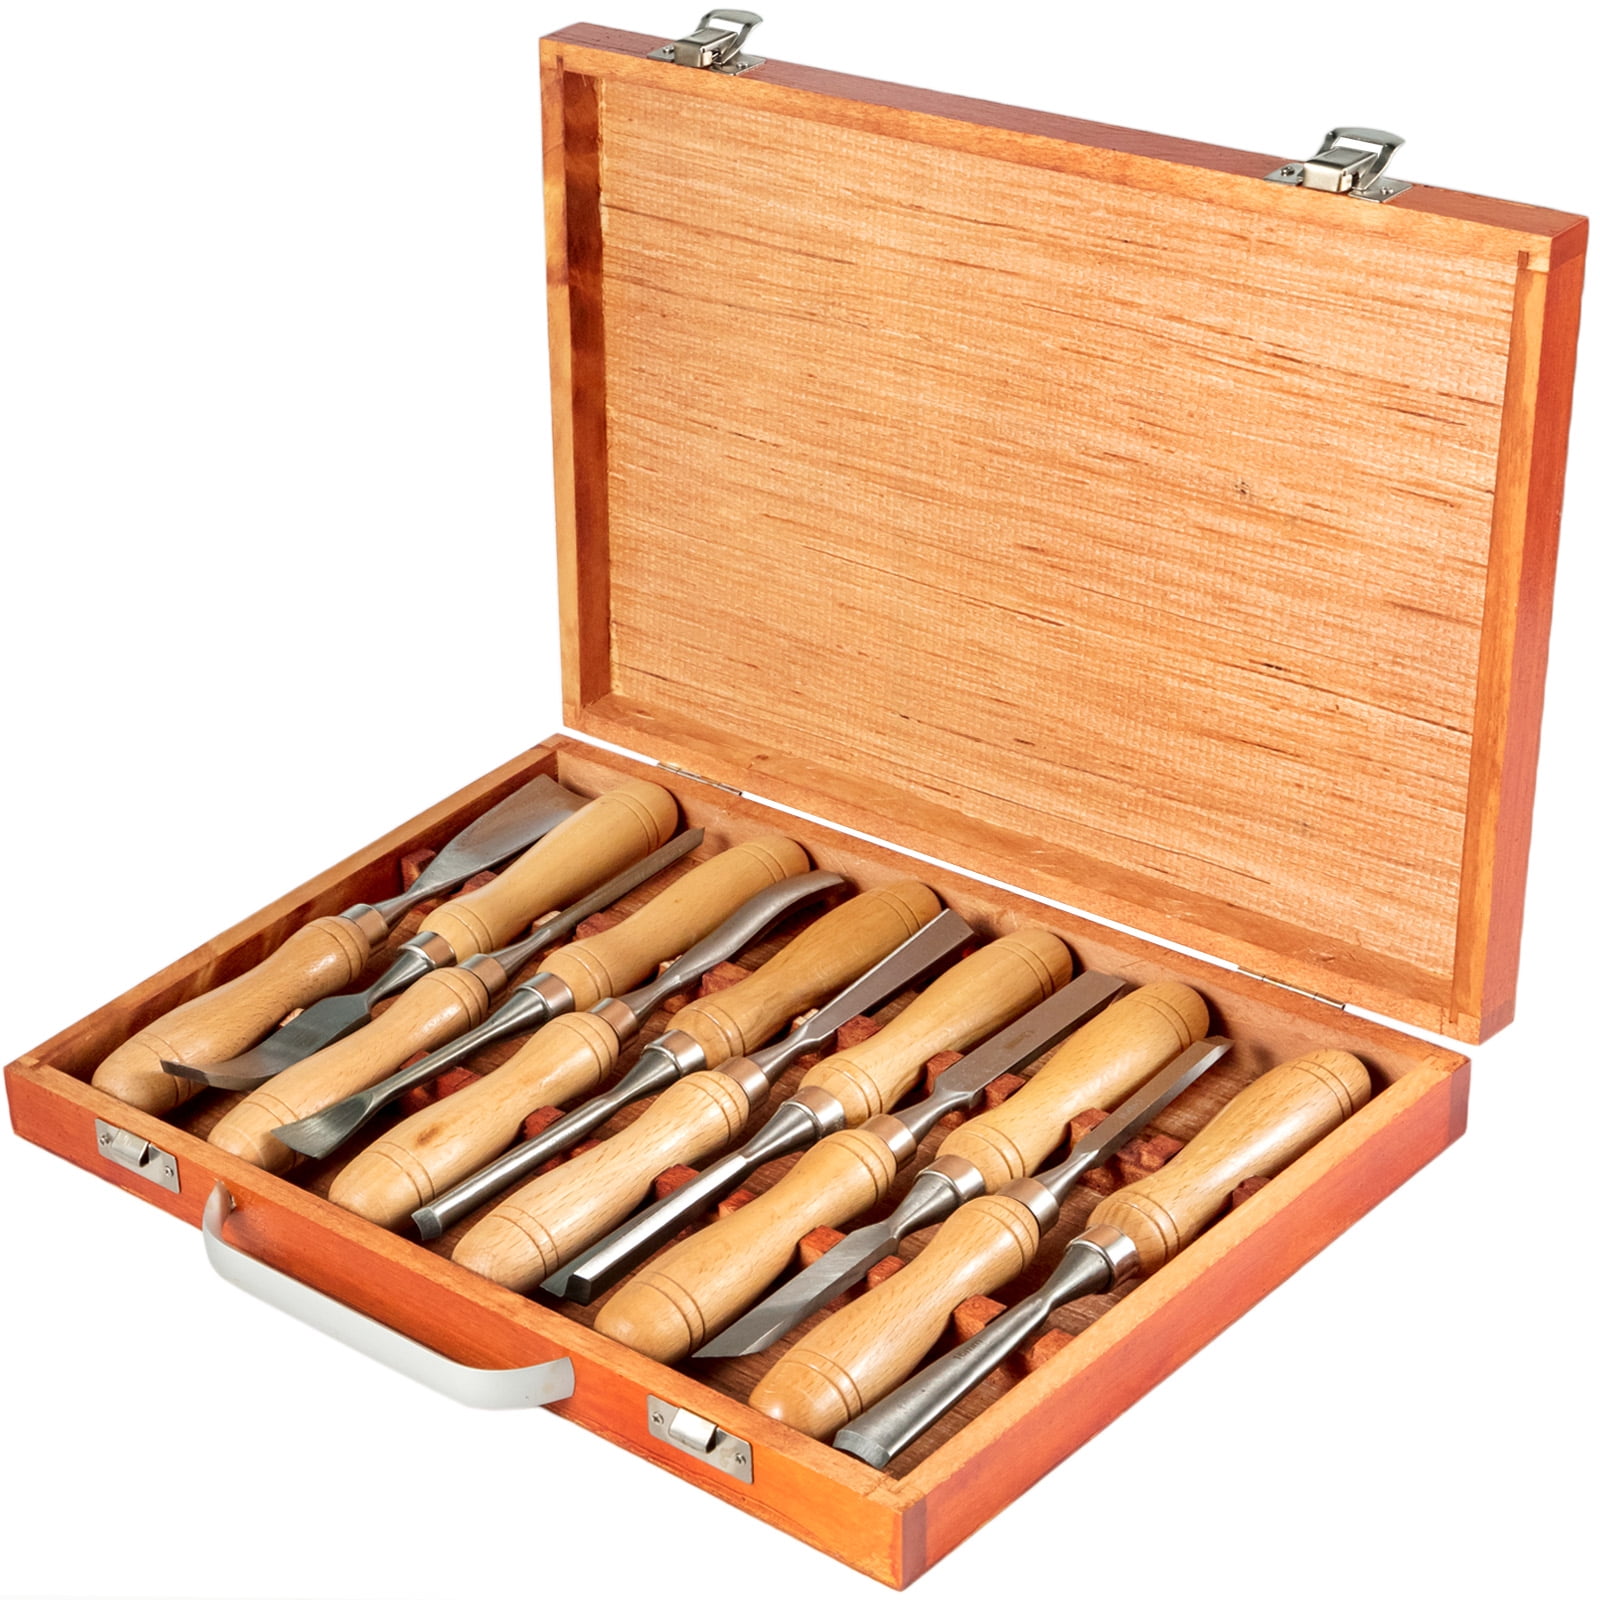 Wood Chisel Set with Tool Roll Bag for Carving Woodworking 1/4” 1” 3/4” 1/2” 